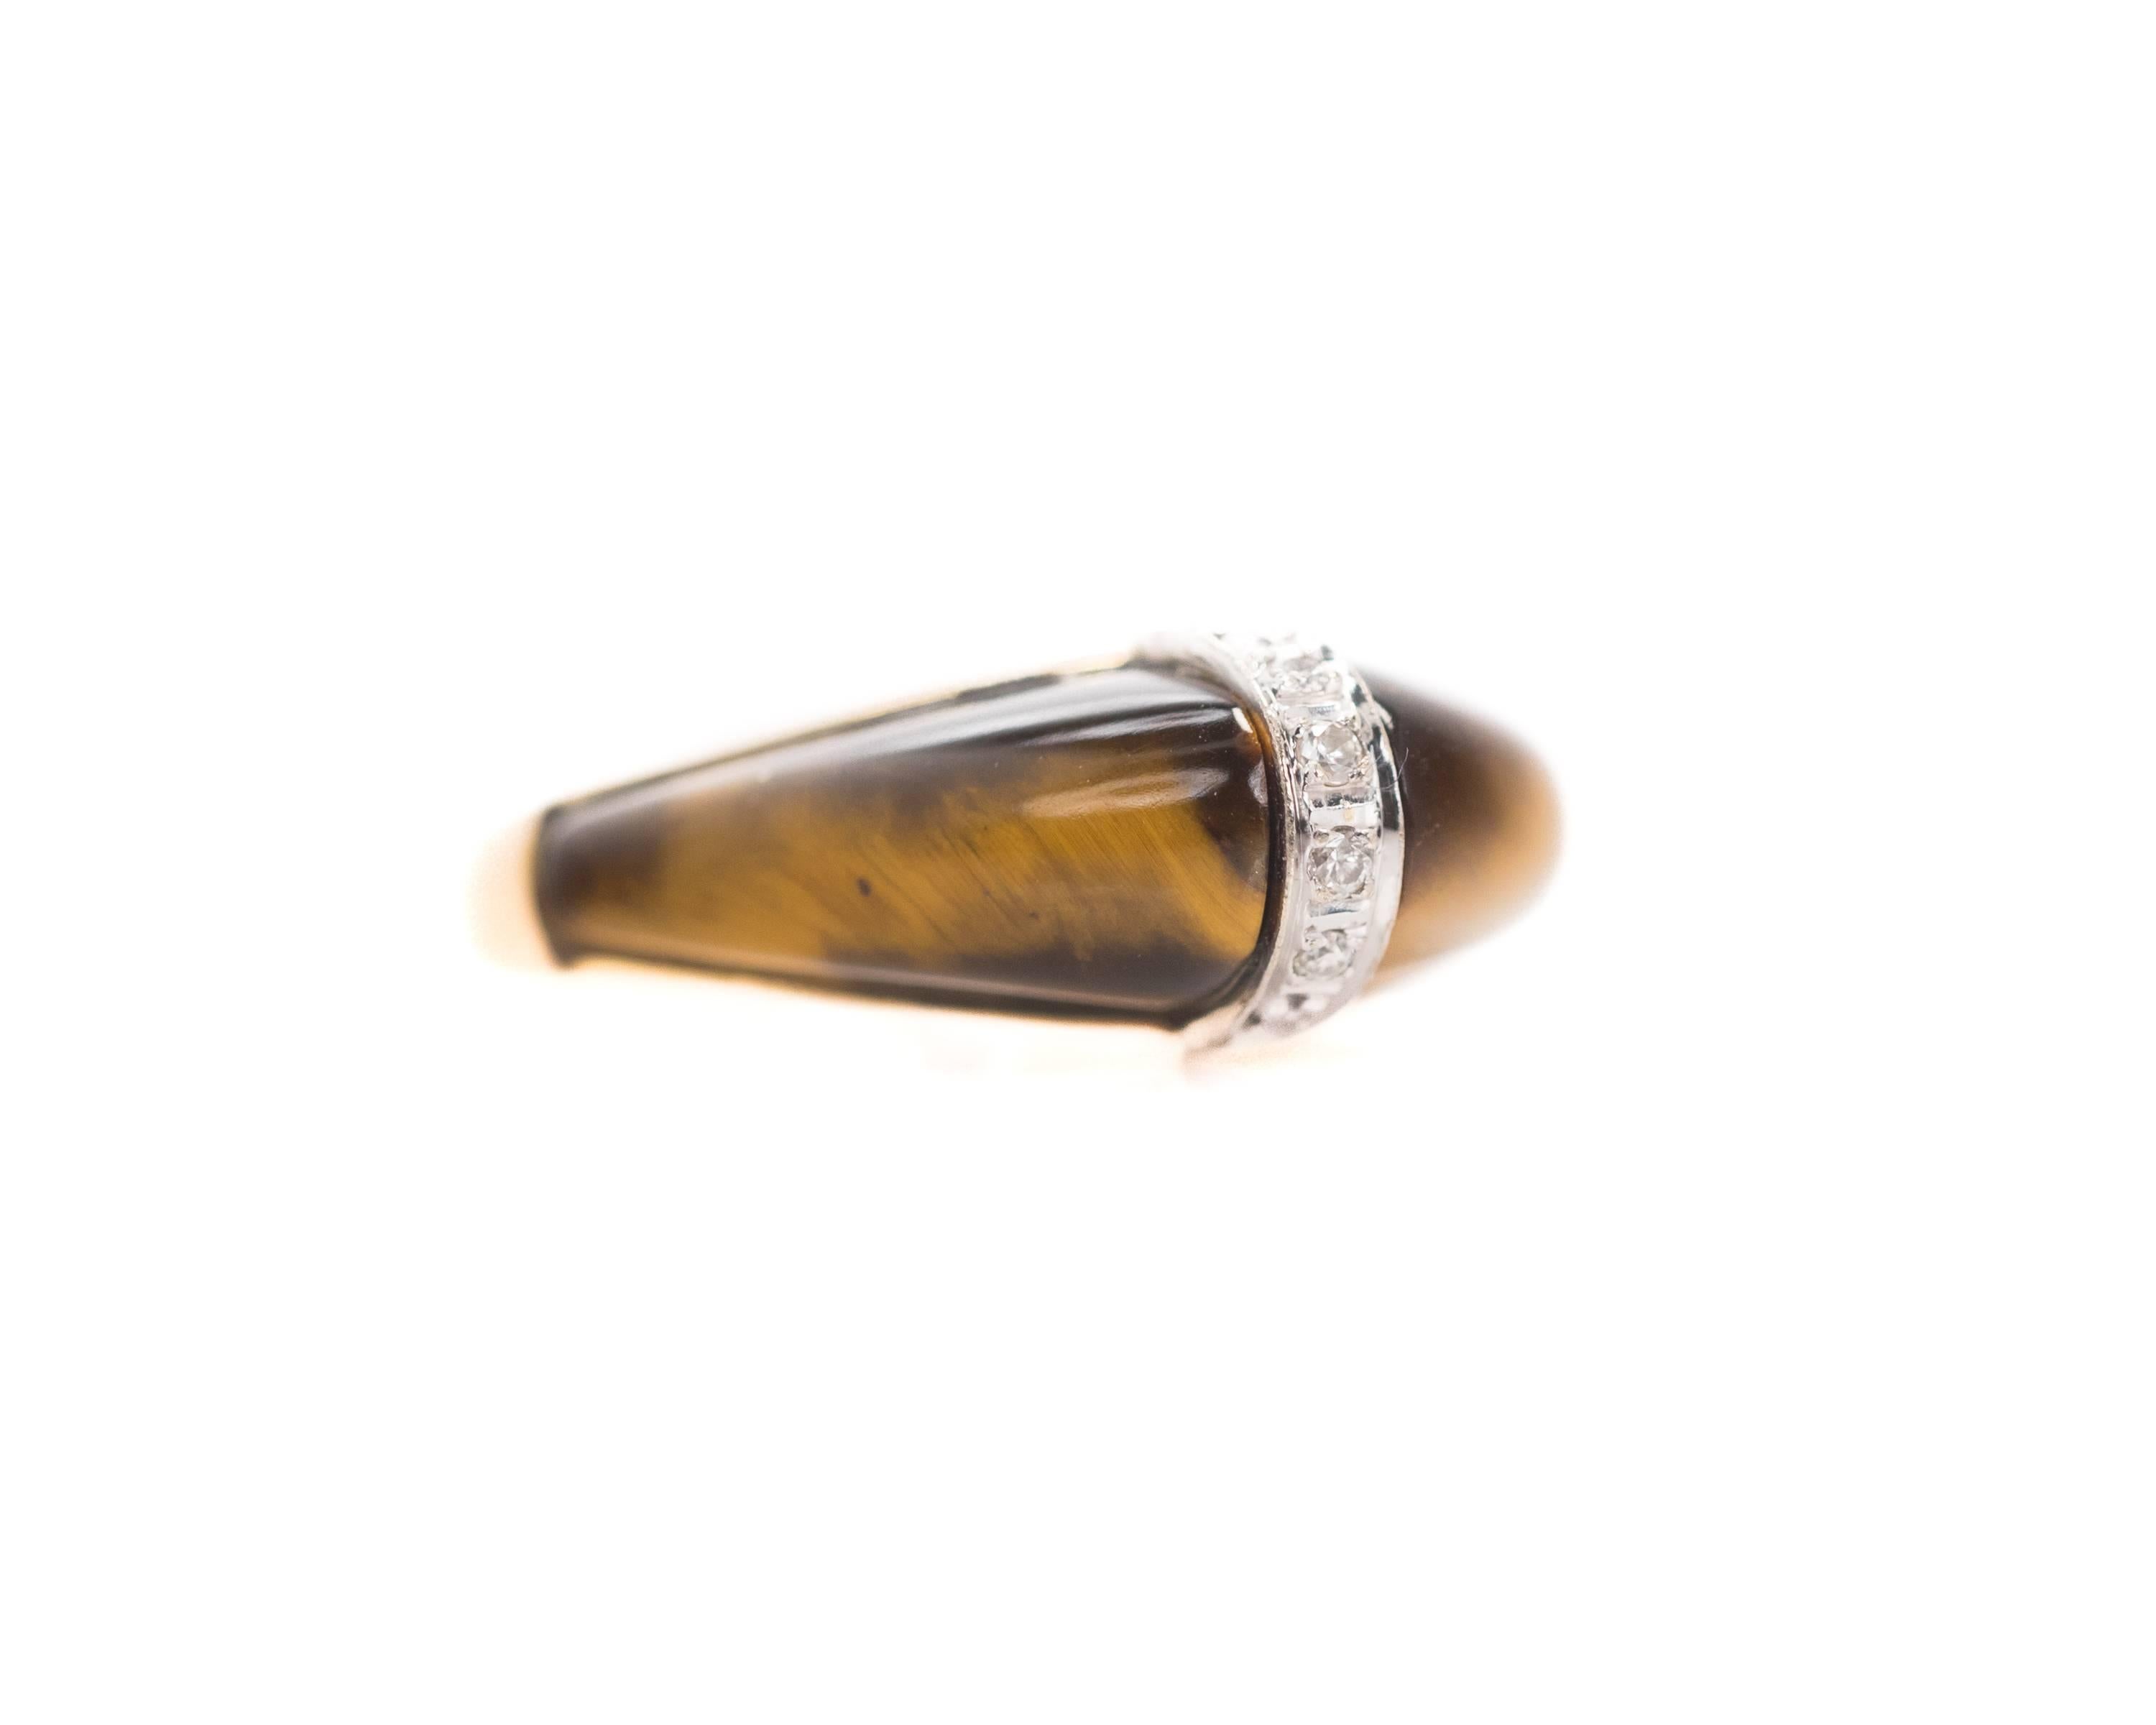 1950s Dome Ring - 14K Yellow Gold, Diamonds, Tiger's Eye

Features a peaked dome of Tiger's Eye with Diamonds. The front half of the ring is set with brown and gold Tiger's Eye. A vertical strip of Round Brilliant Diamonds runs through the center.